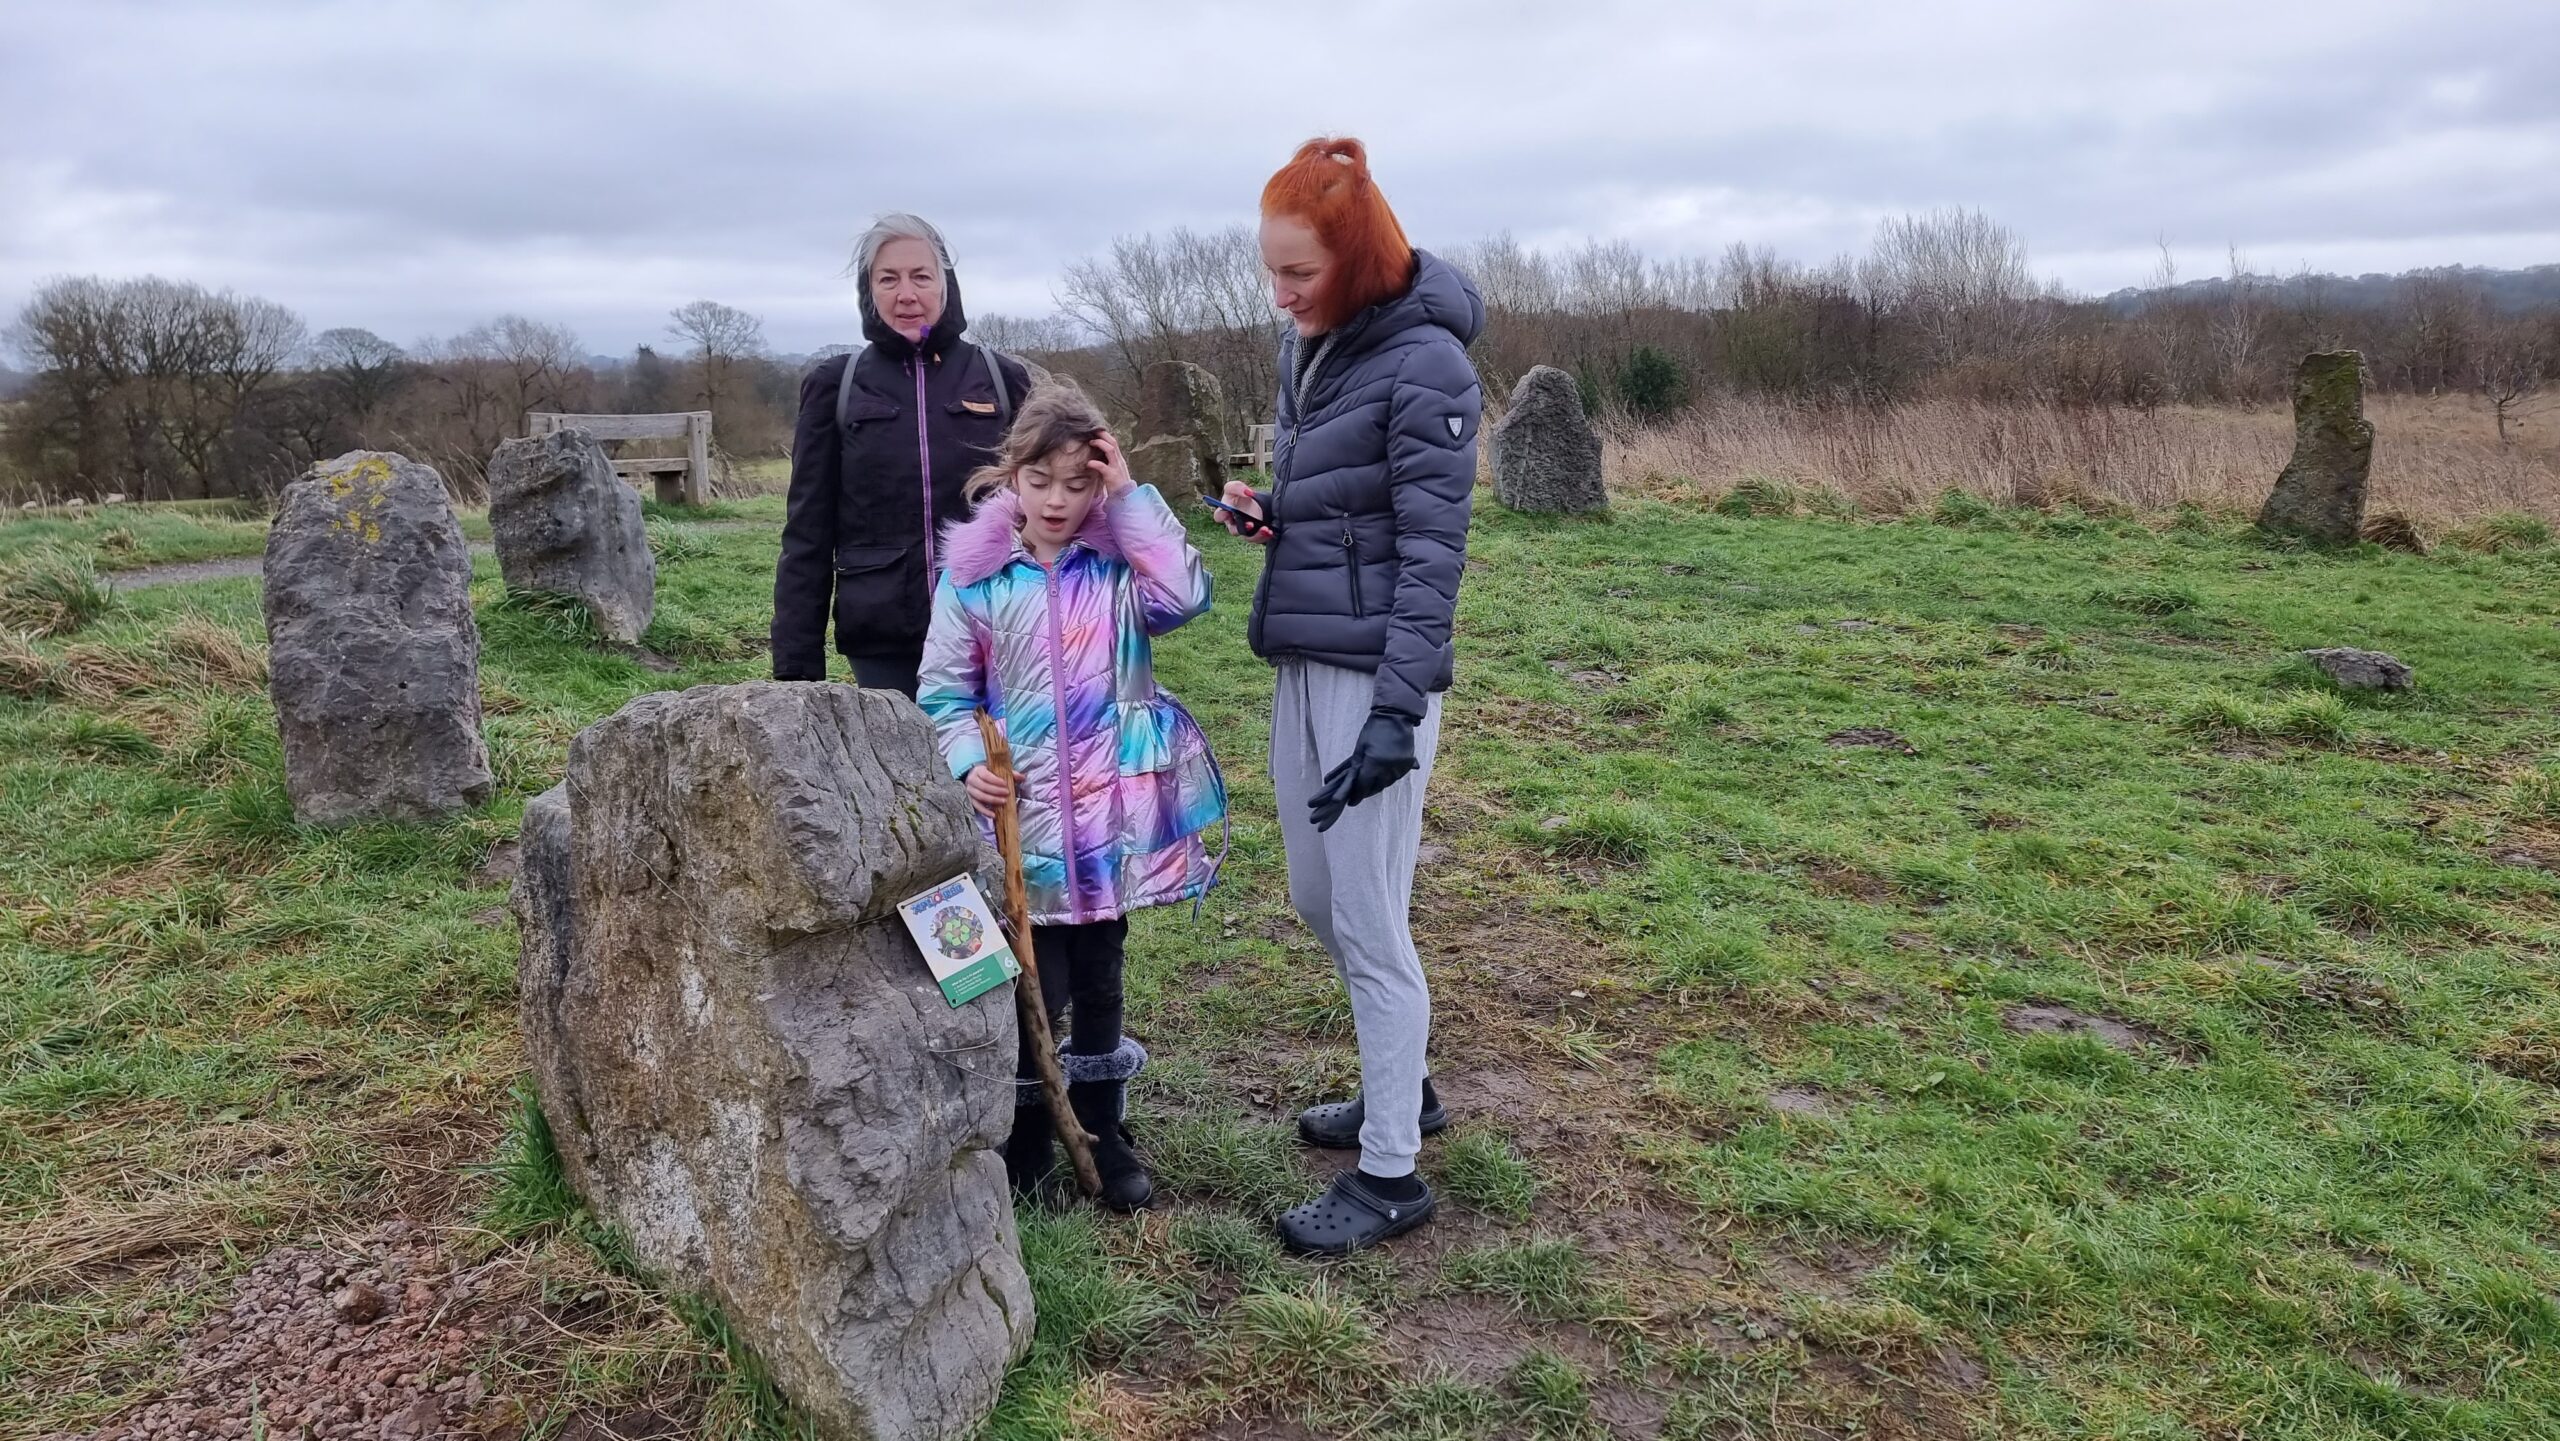 In a grassy field, a 9-year-old girl in a bright coat, accompanied by two women, examines a standing rock at the edge of a small stone circle.